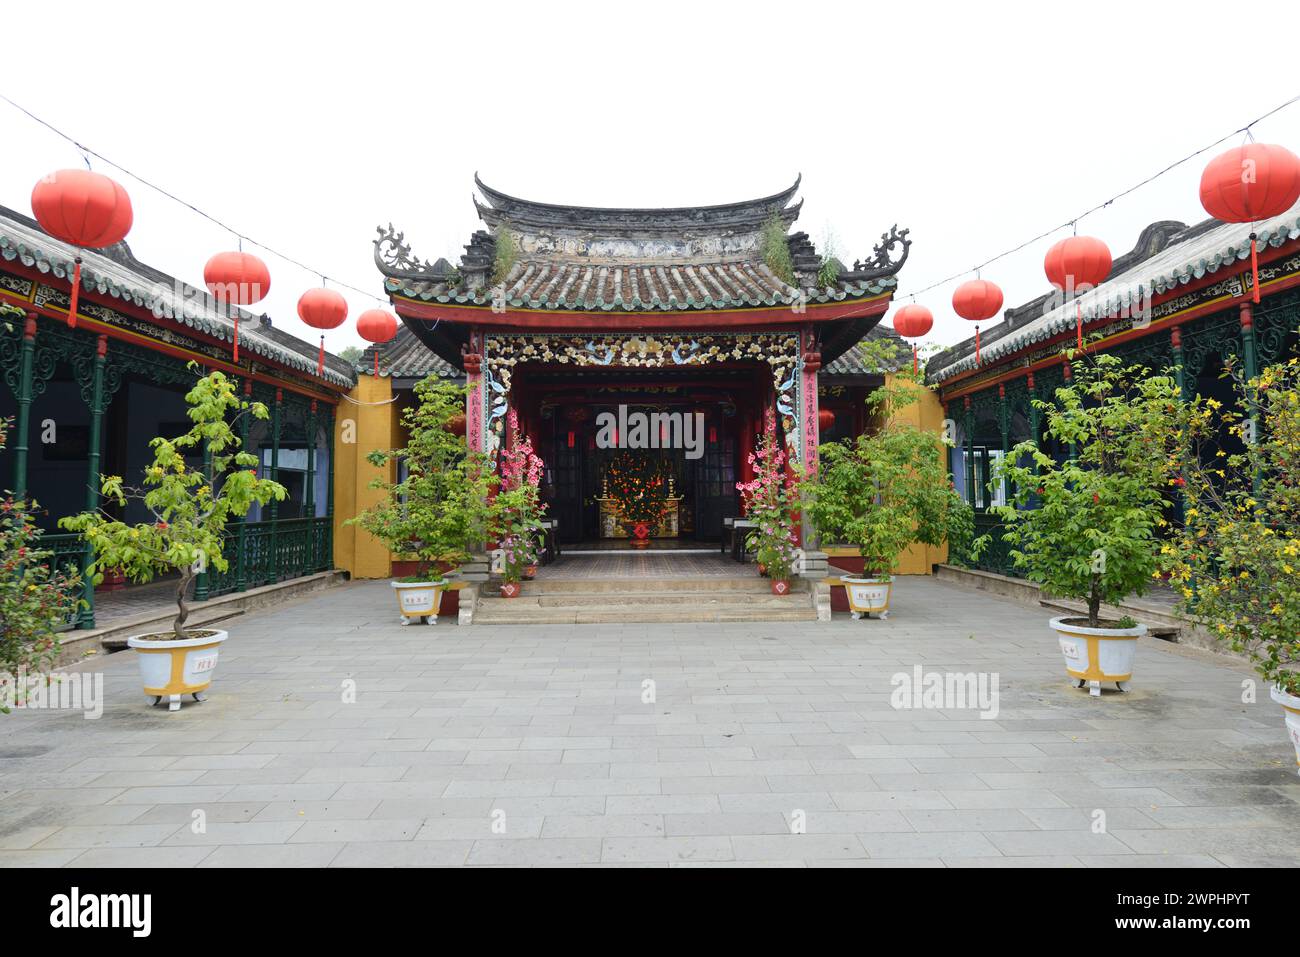 Hoa Van Le Nghia Buddhist temple in the old town of Hoi An, Vietnam. Stock Photo